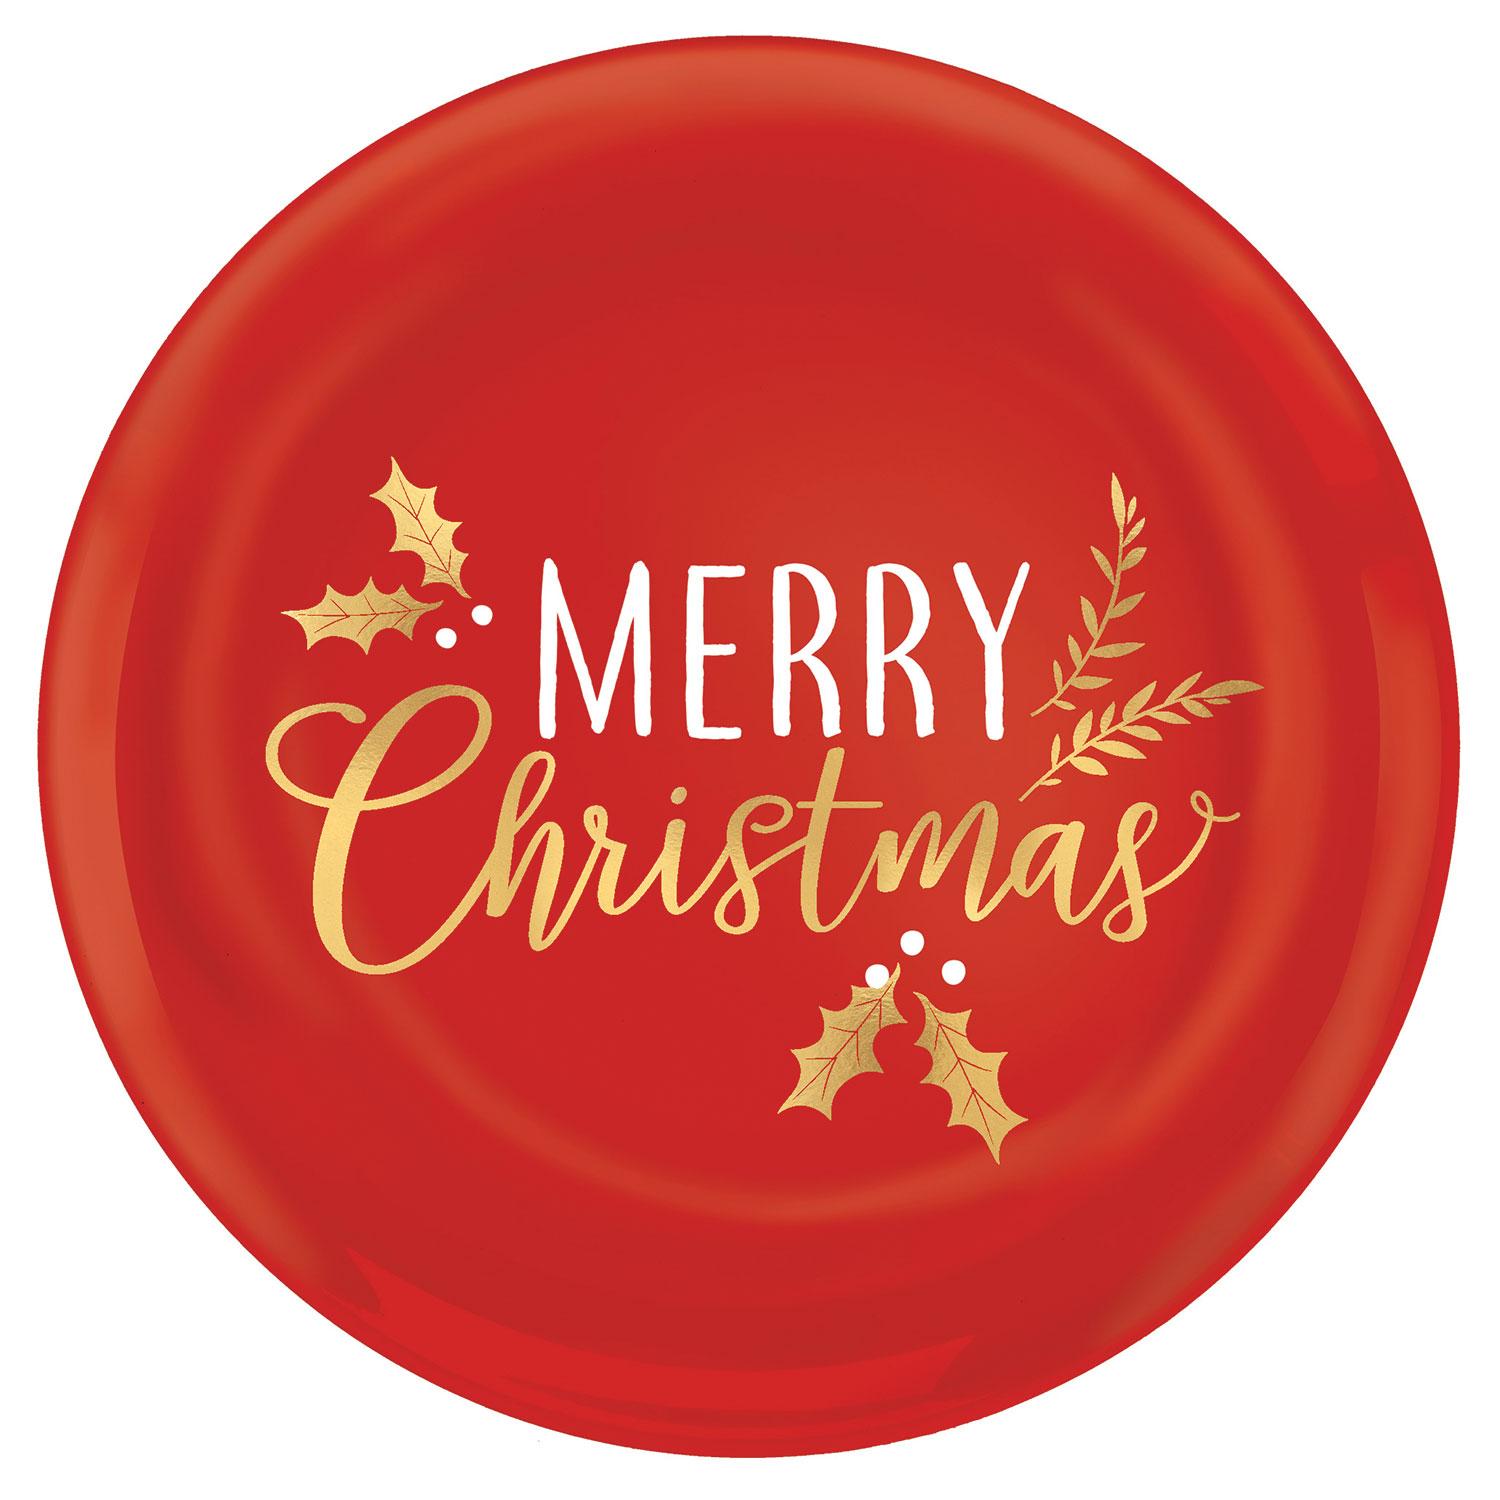 Merry Christmas Hot Stamped Platters 9pcs Solid Tableware - Party Centre